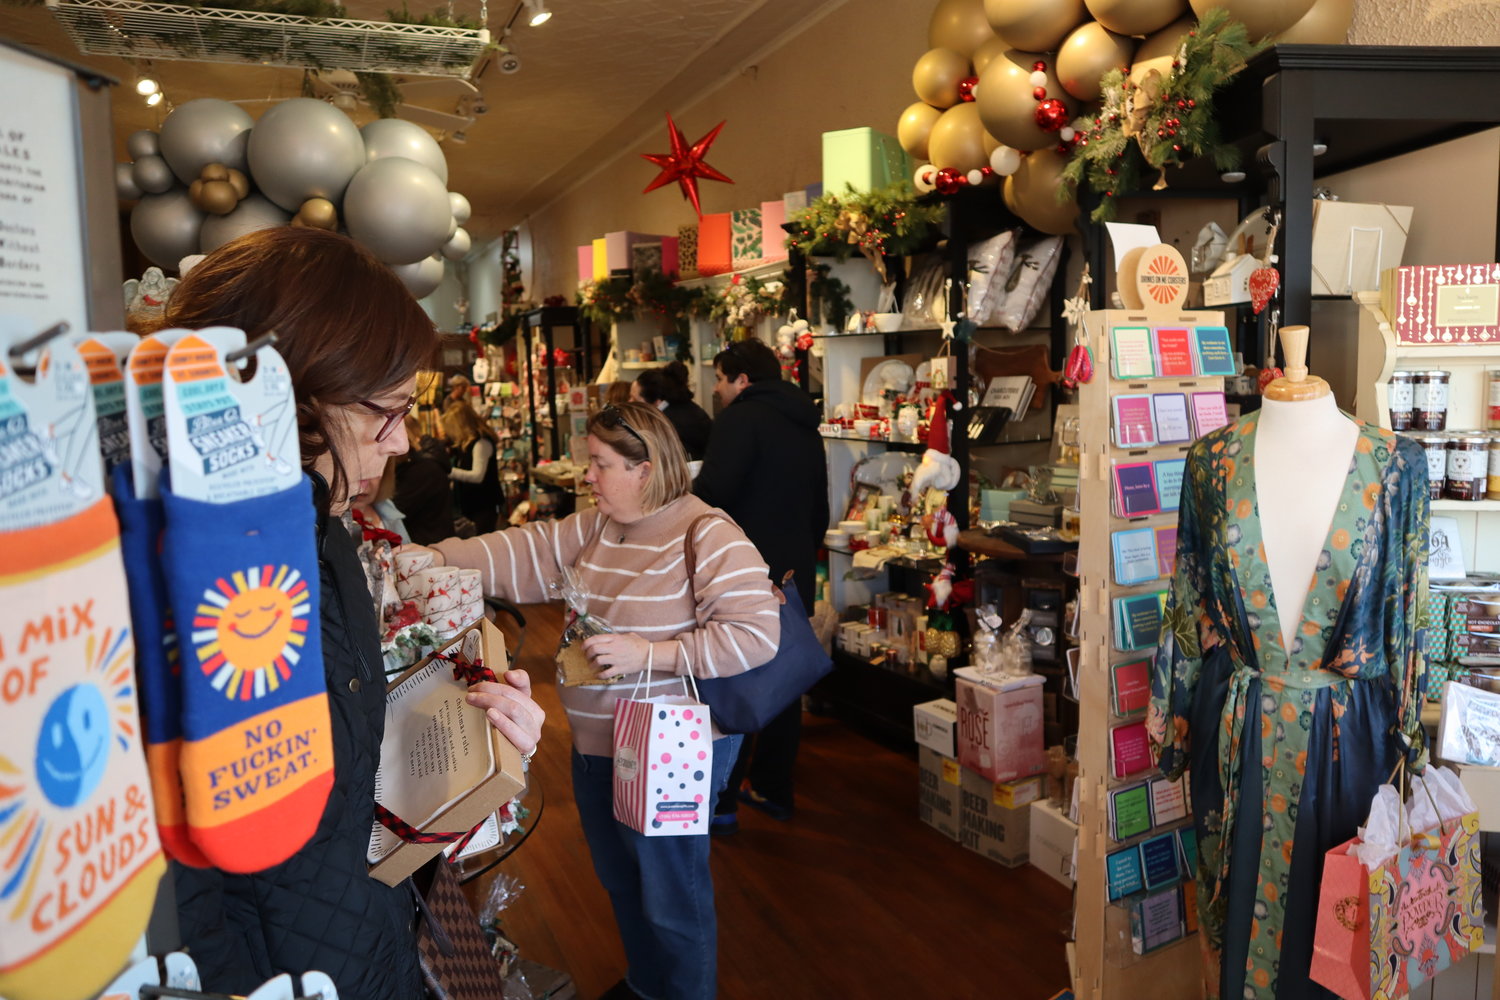 Dozens of shoppers browsed the shelves at the Giftologist, on Park Avenue in Rockville Centre.